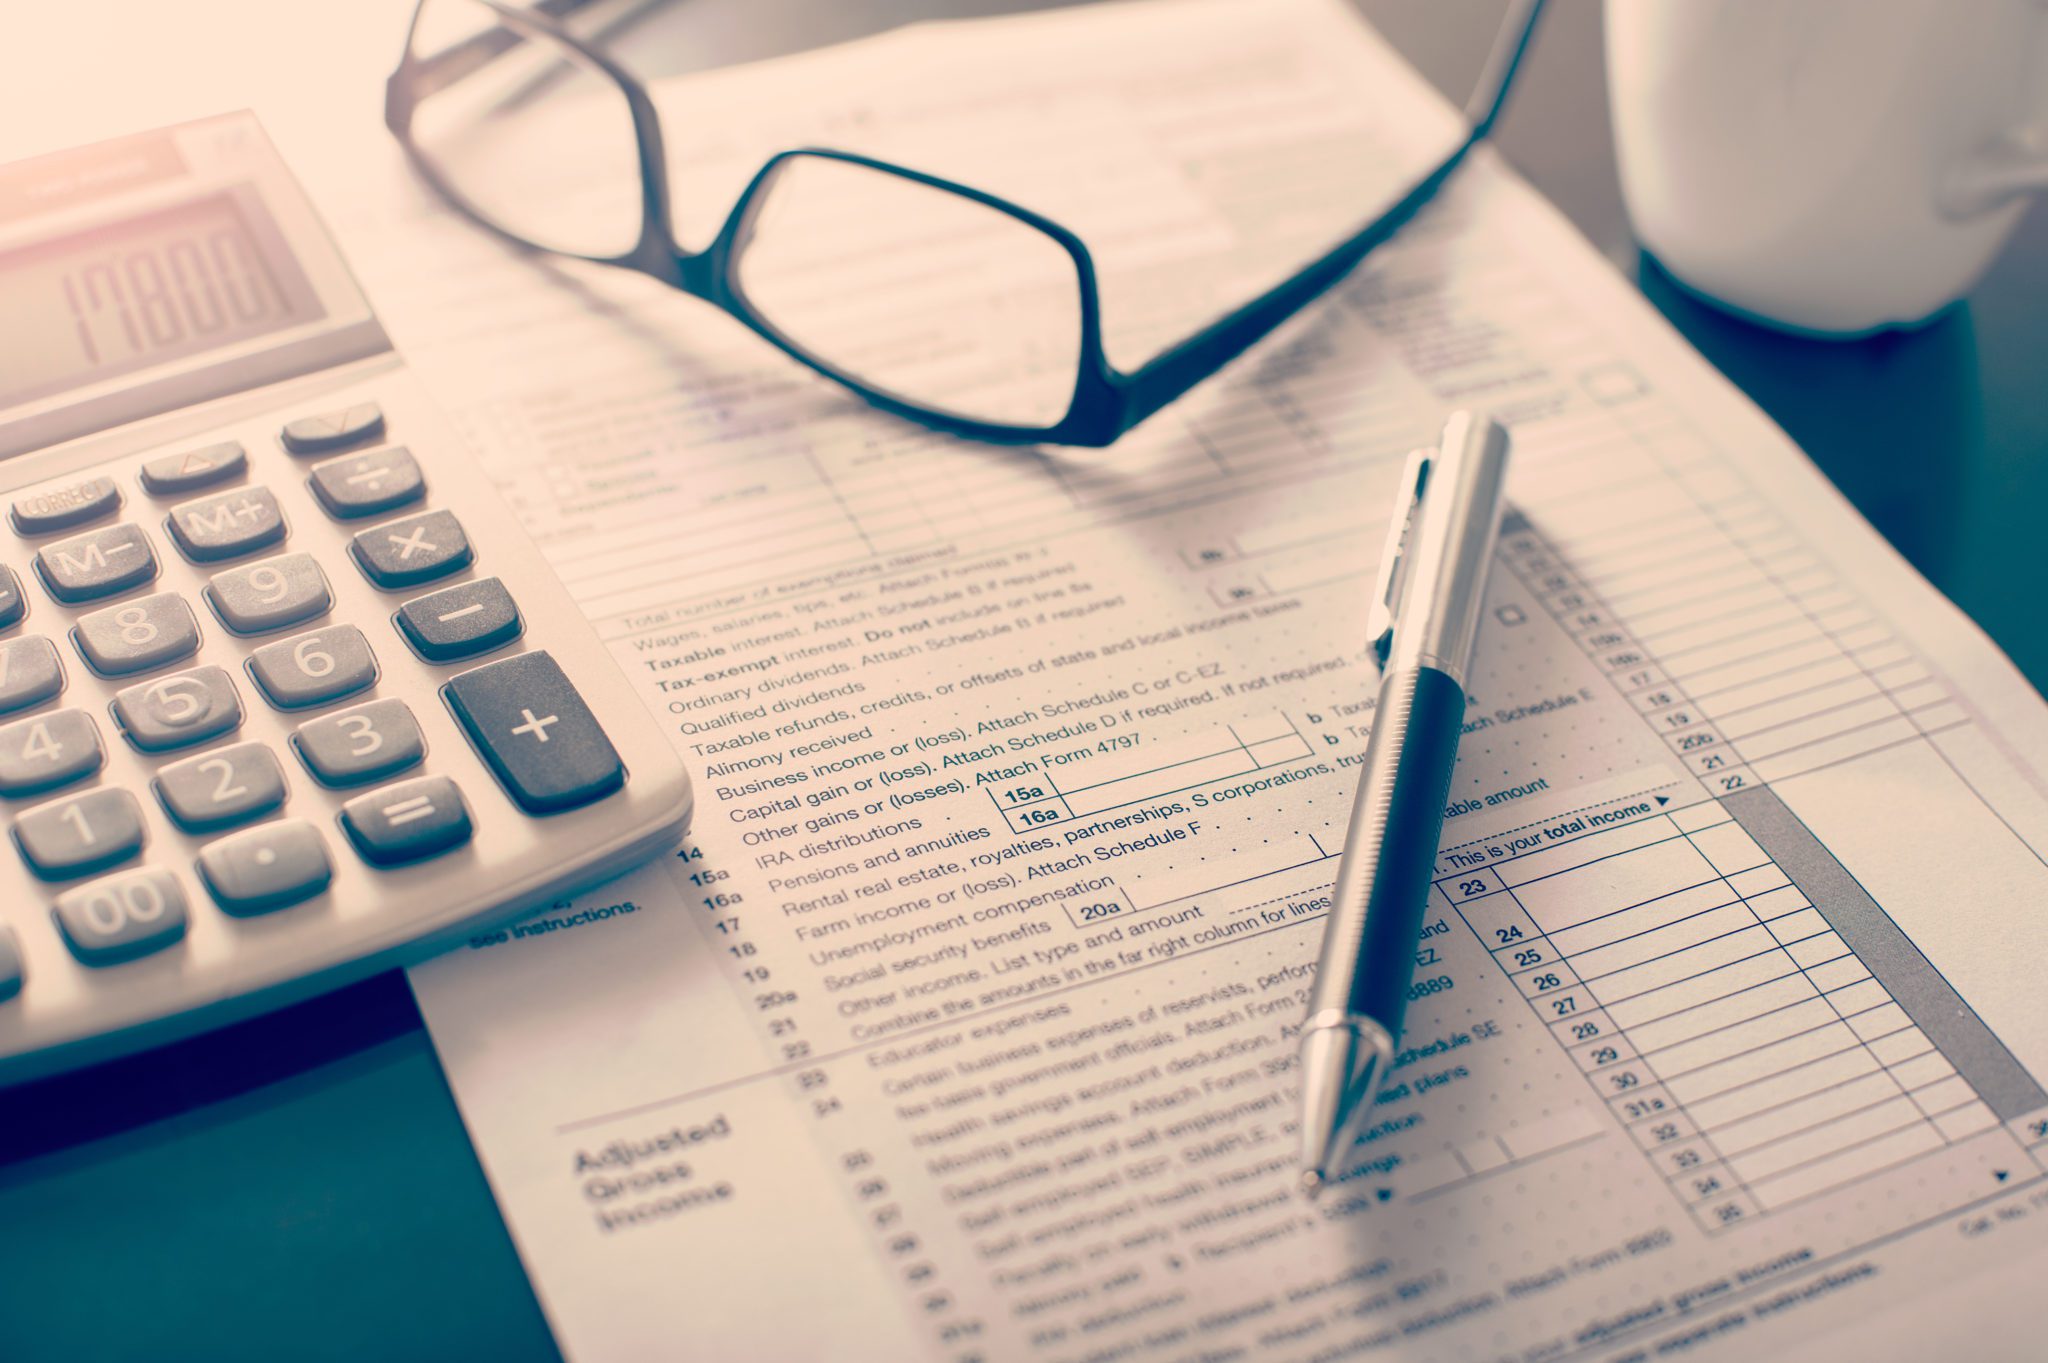 9 FINAL TAX REVIEW MISTAKES THAT COULD COST YOU